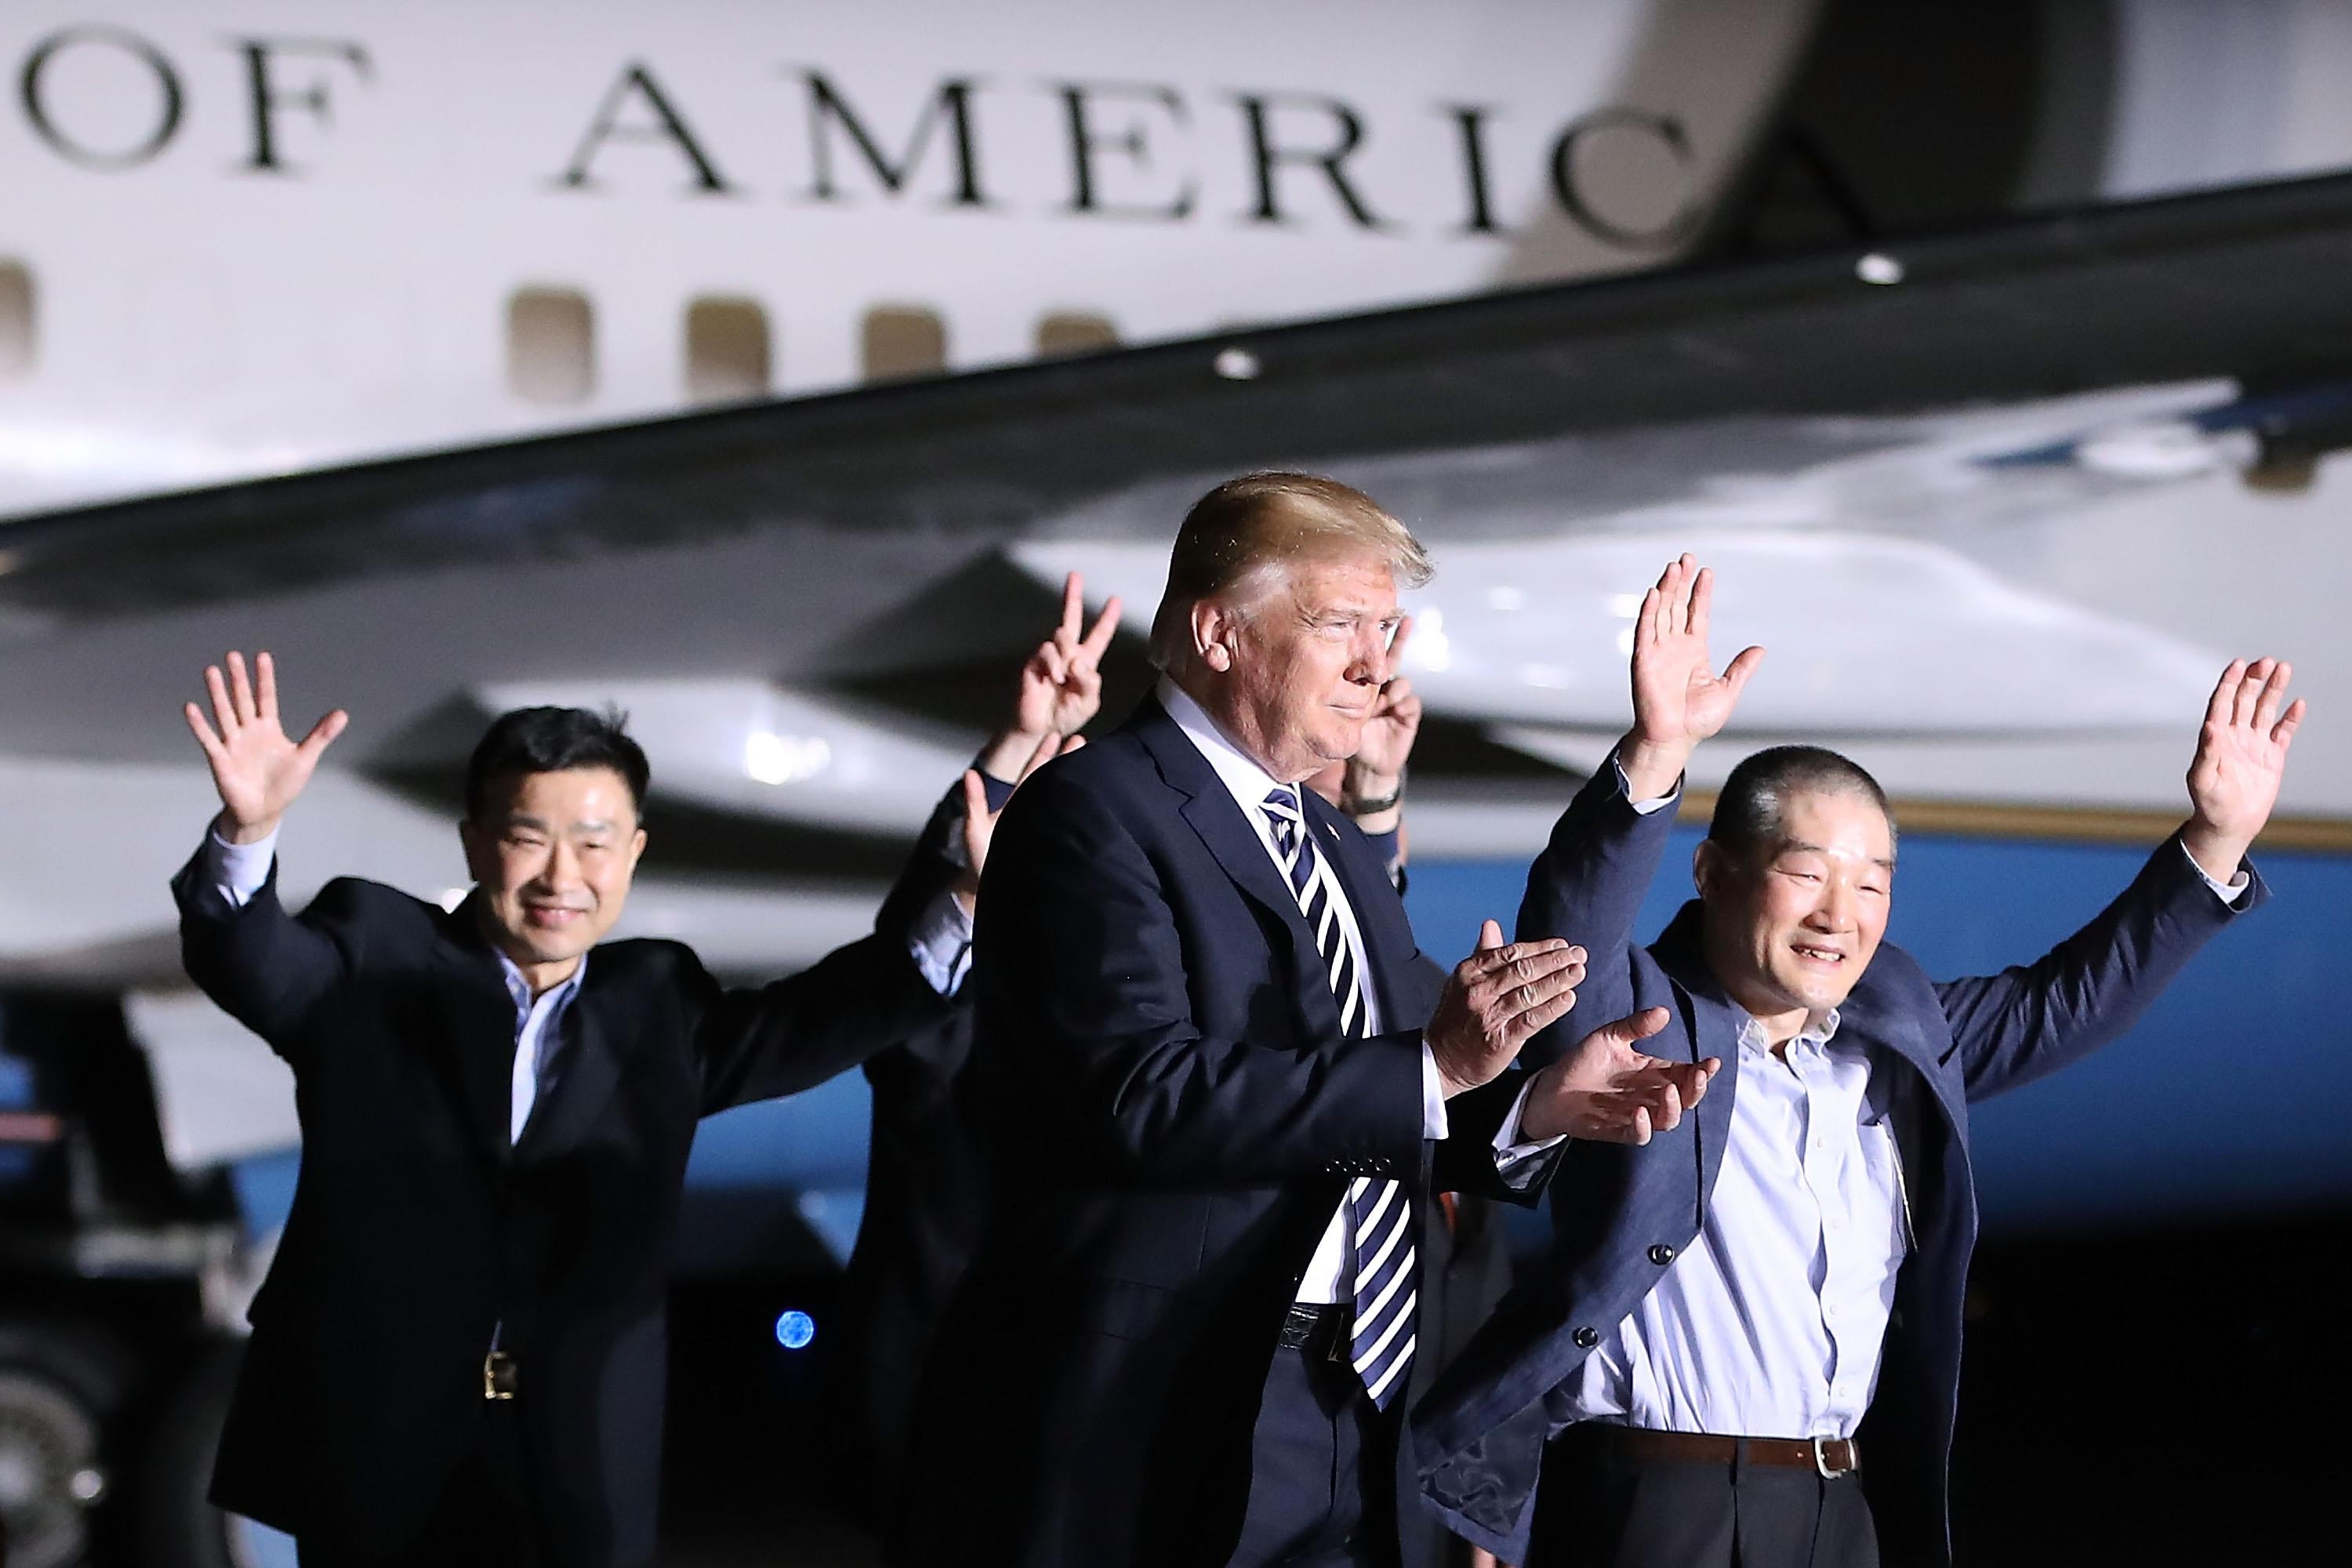 Trump walking beside Air Force One along with three dressed-up men waving.